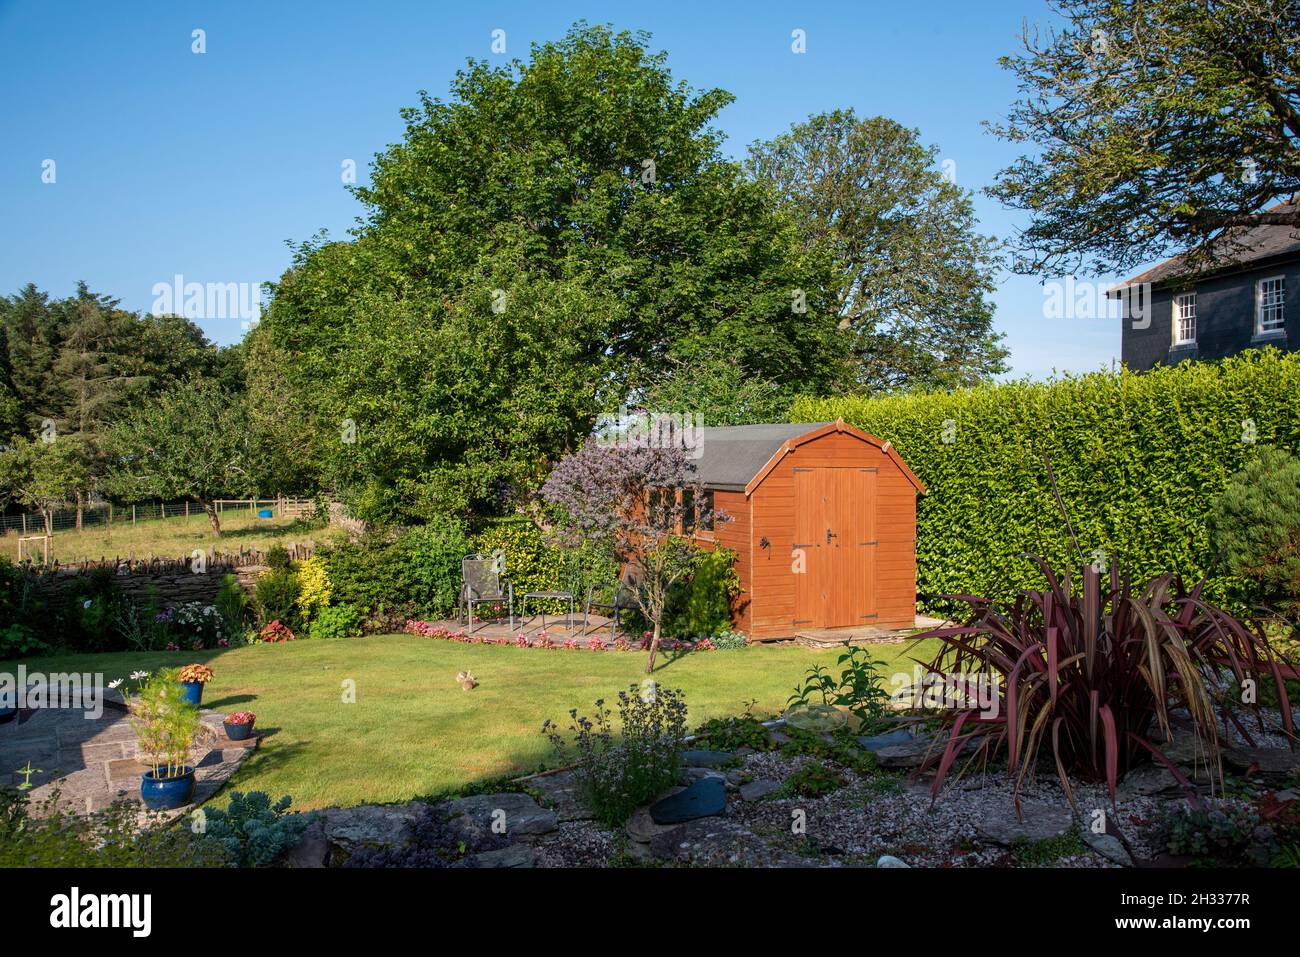 Devon, England, UK. 2021.  A Dutch barn style garden shed with double doors standing with patio, tables and chairs in an English country garden. Stock Photo